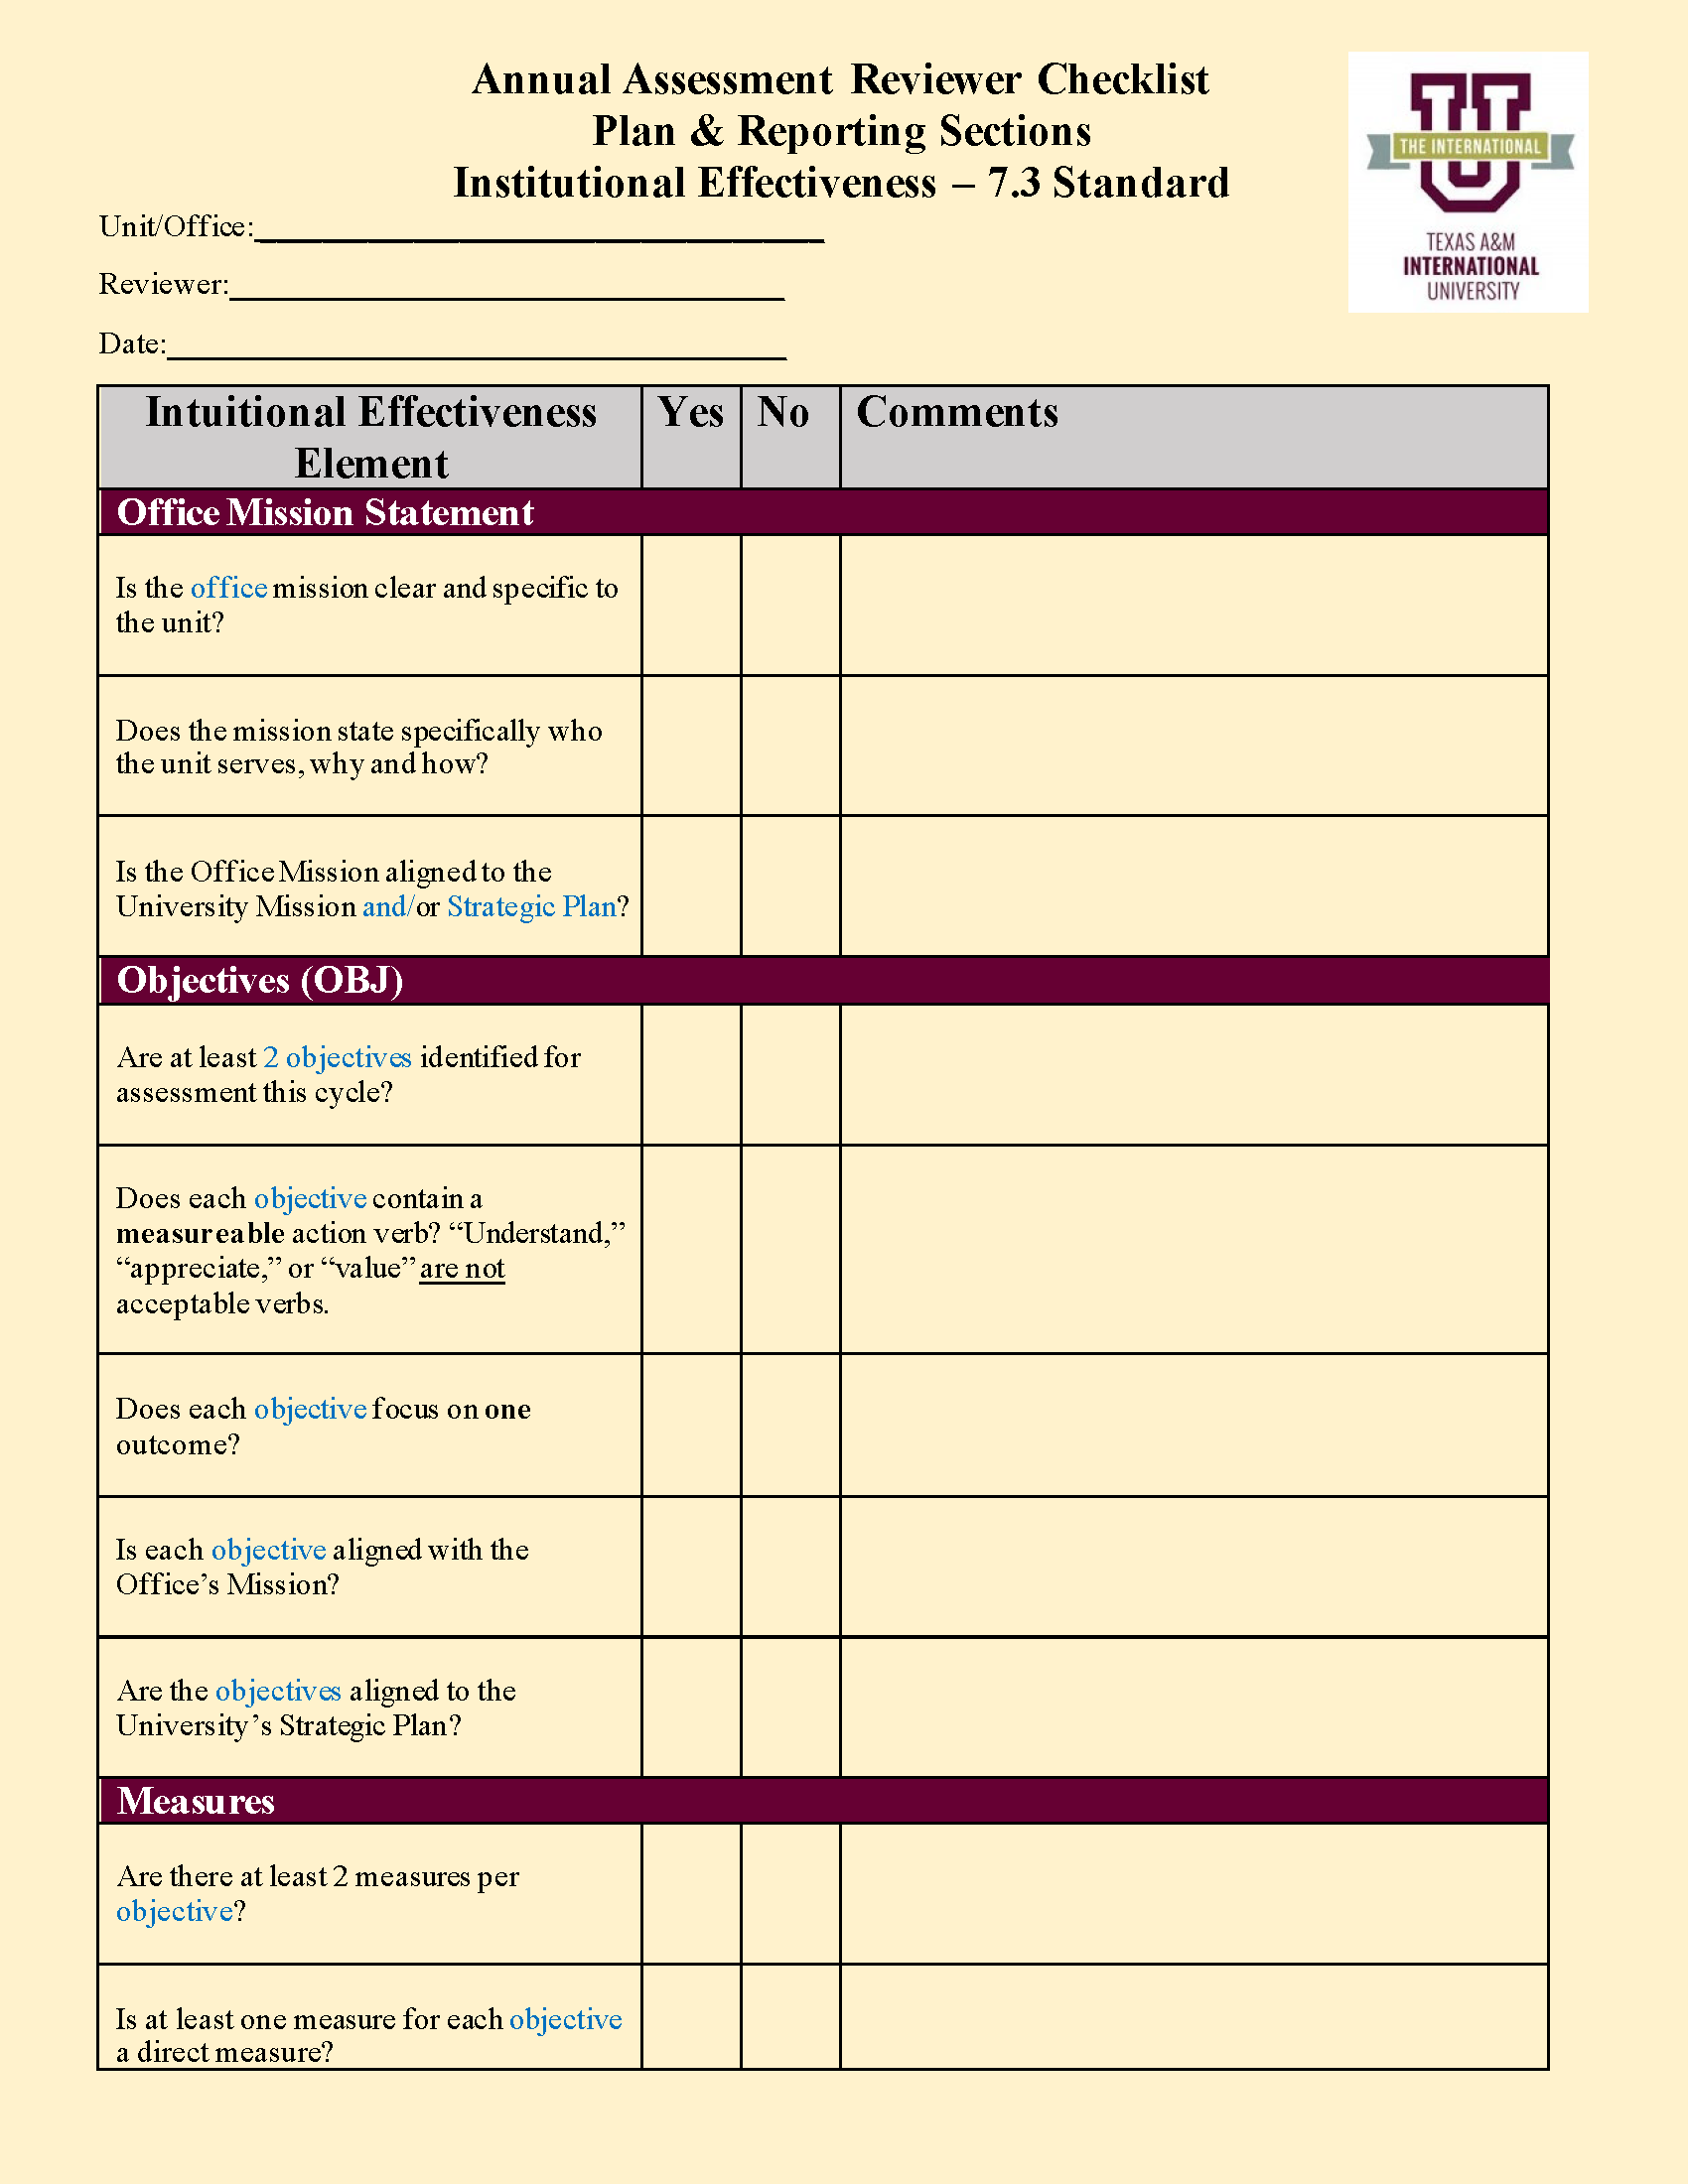 Reviewer Checklist IE (Plan &amp; Report) 2021 - 2022 Image